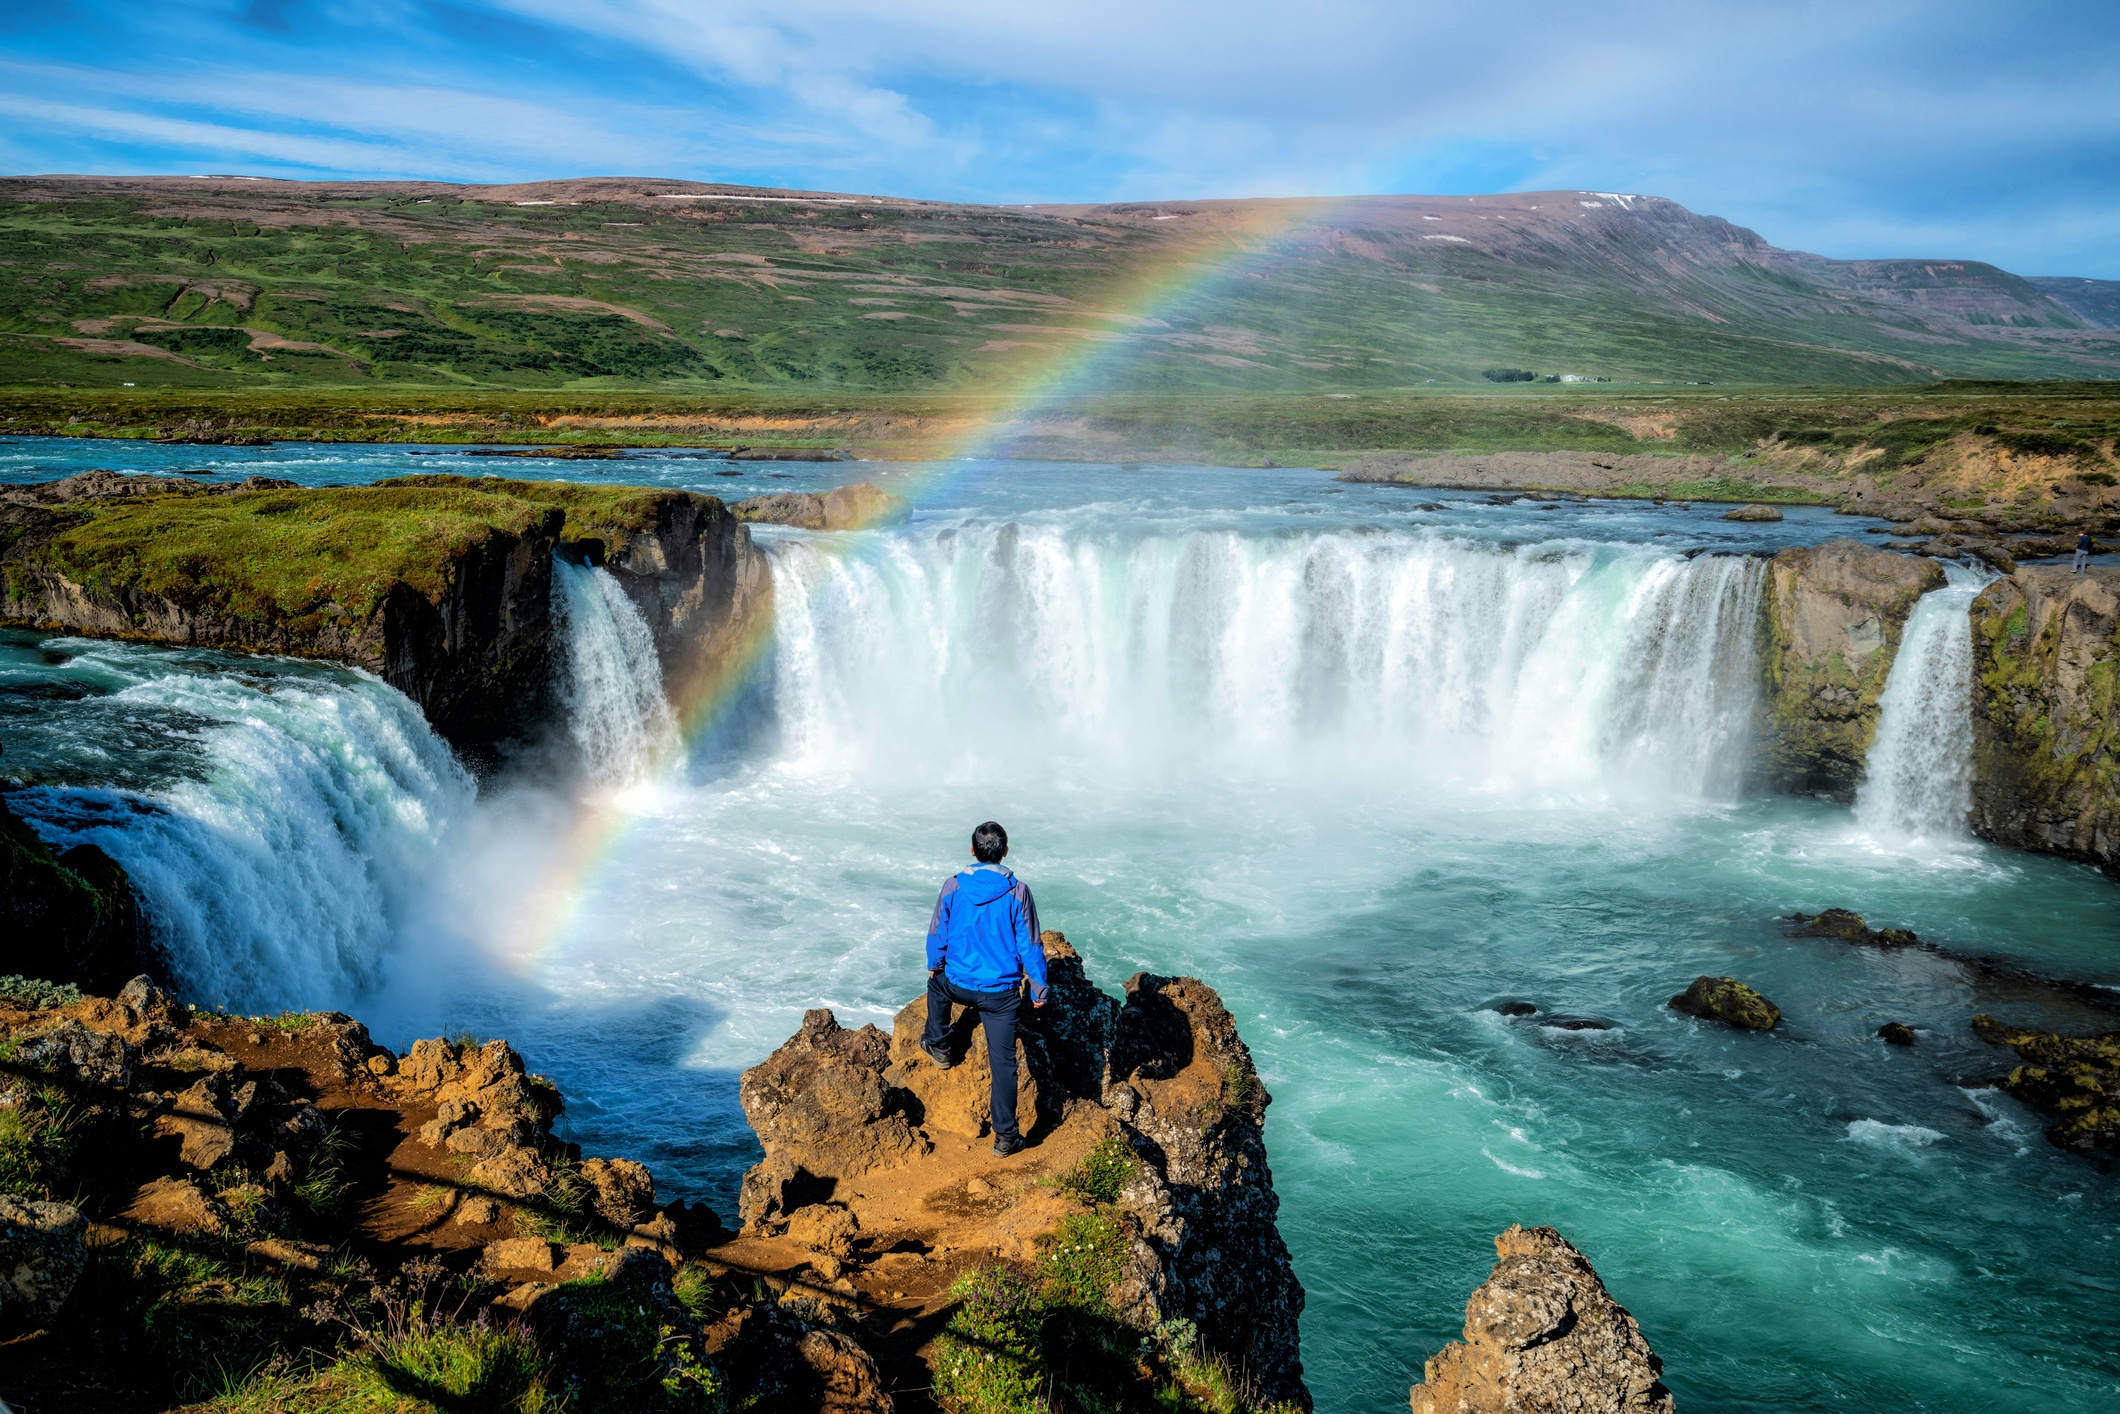 7 Unchanging Attributes of God | Bible Study Resource | The Godafoss (Icelandic: waterfall of the gods) is a famous waterfall in Iceland. The breathtaking landscape of Godafoss waterfall attracts tourist to visit the Northeastern Region of Iceland.